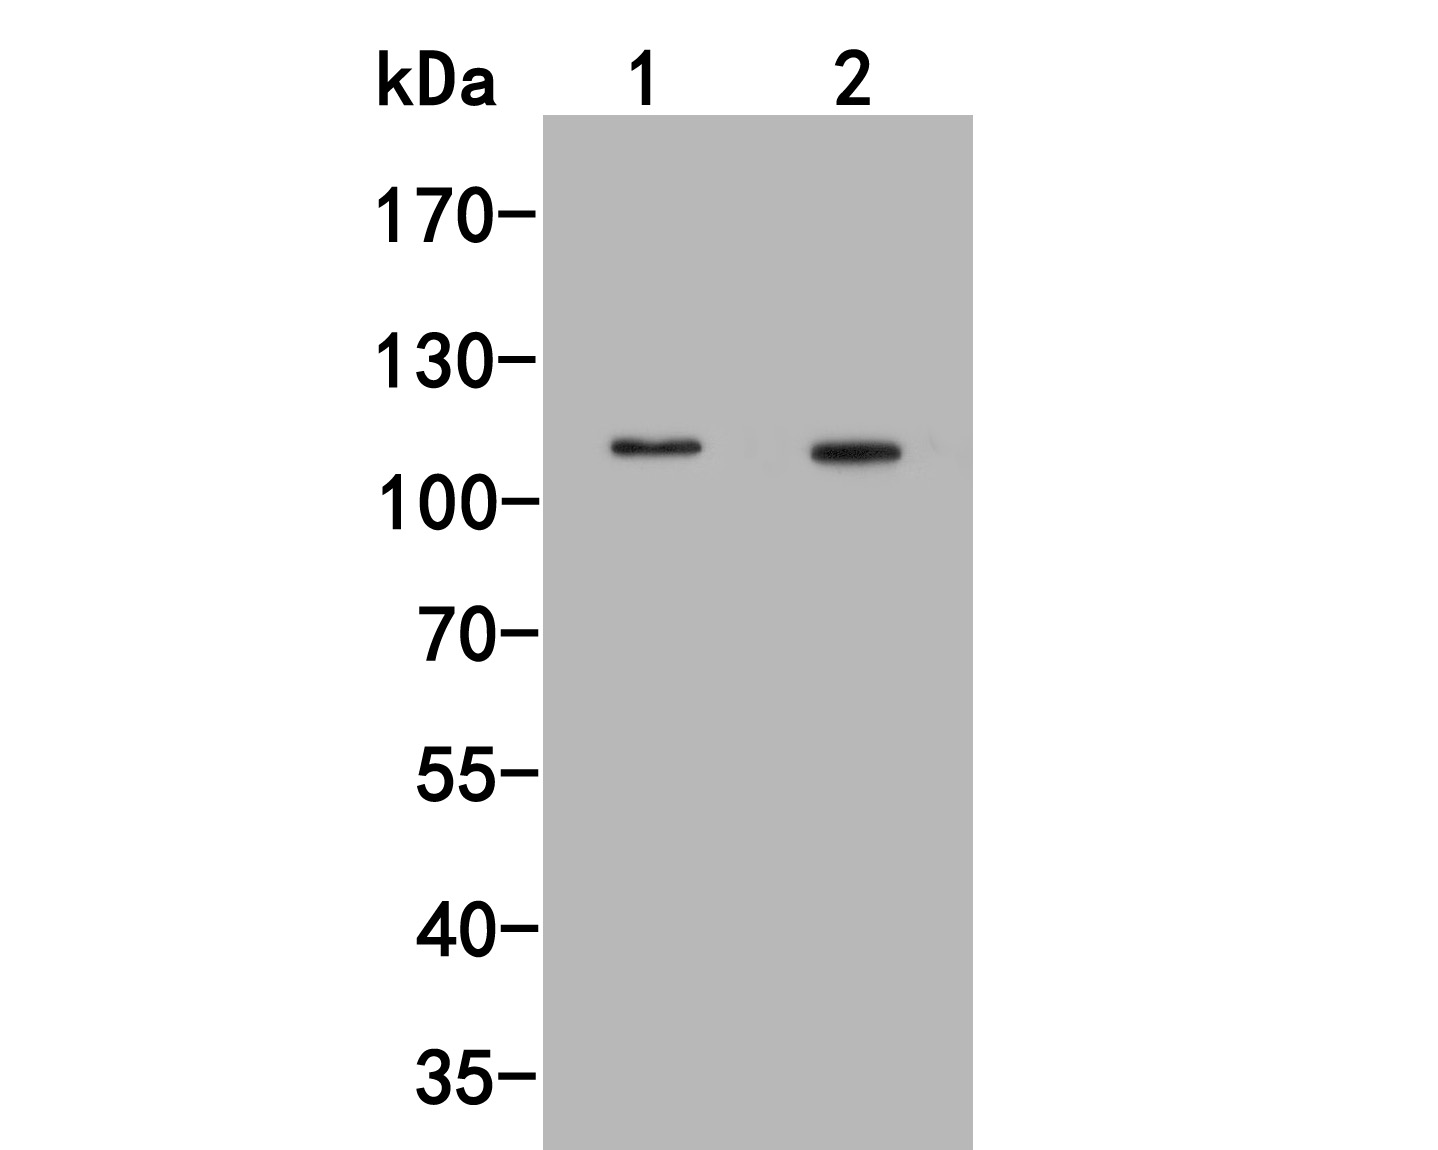 Western blot analysis of FAM62B on different lysates. Proteins were transferred to a PVDF membrane and blocked with 5% BSA in PBS for 1 hour at room temperature. The primary antibody (M1009-1, 1/500) was used in 5% BSA at room temperature for 2 hours. Goat Anti-Mouse IgG - HRP Secondary Antibody (HA1006) at 1:5,000 dilution was used for 1 hour at room temperature.<br />
Positive control: <br />
Lane 1: Siha cell lysate<br />
Lane 2: THP-1 cell lysate